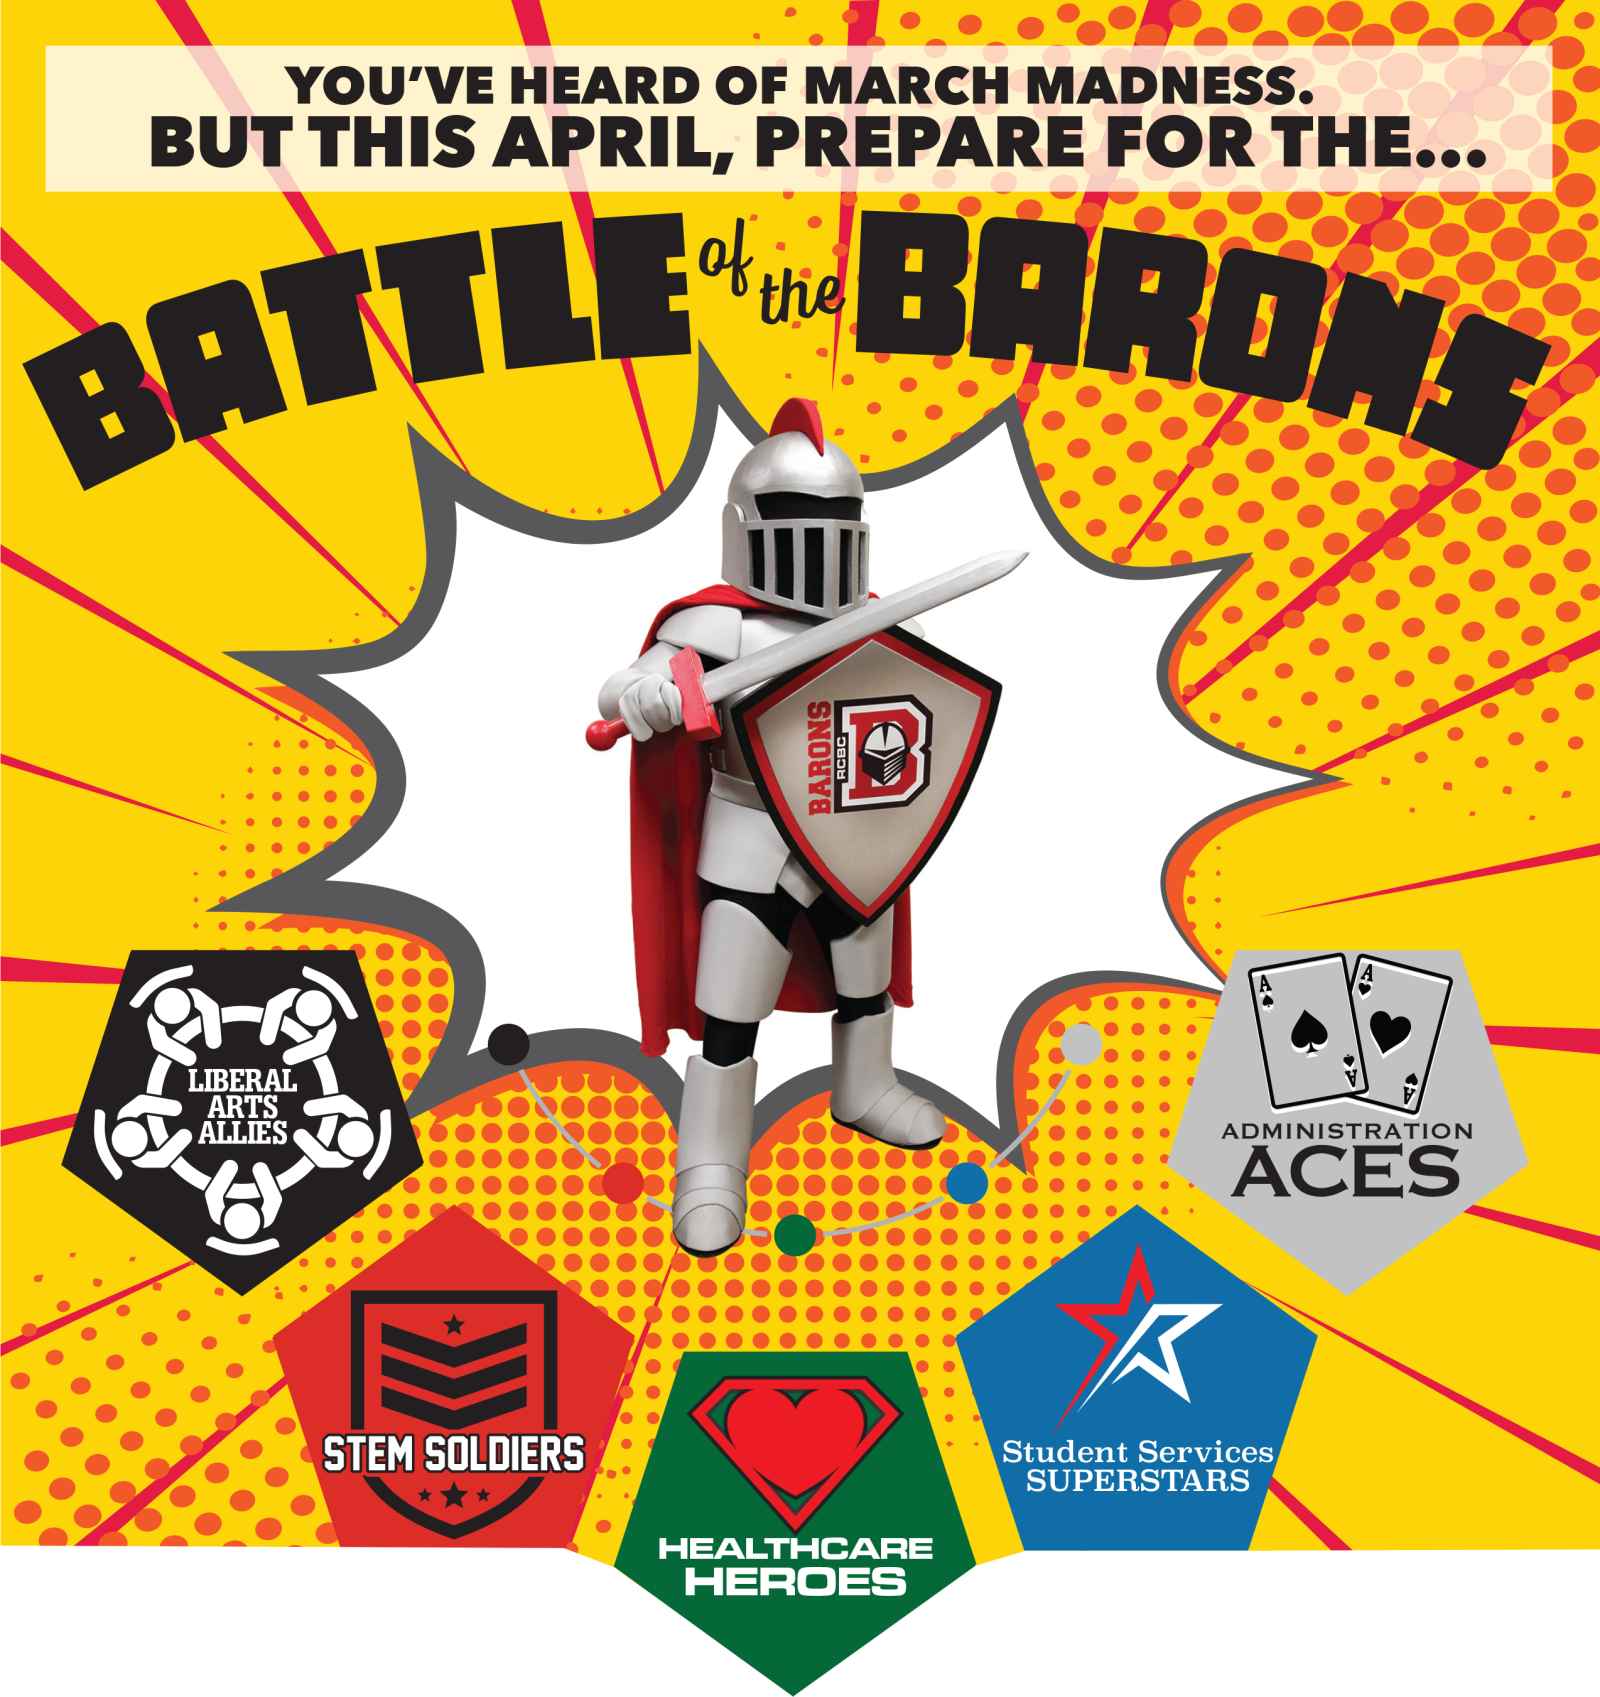 Barry standing in center with various team logos below him and Battle of the Barons across the top